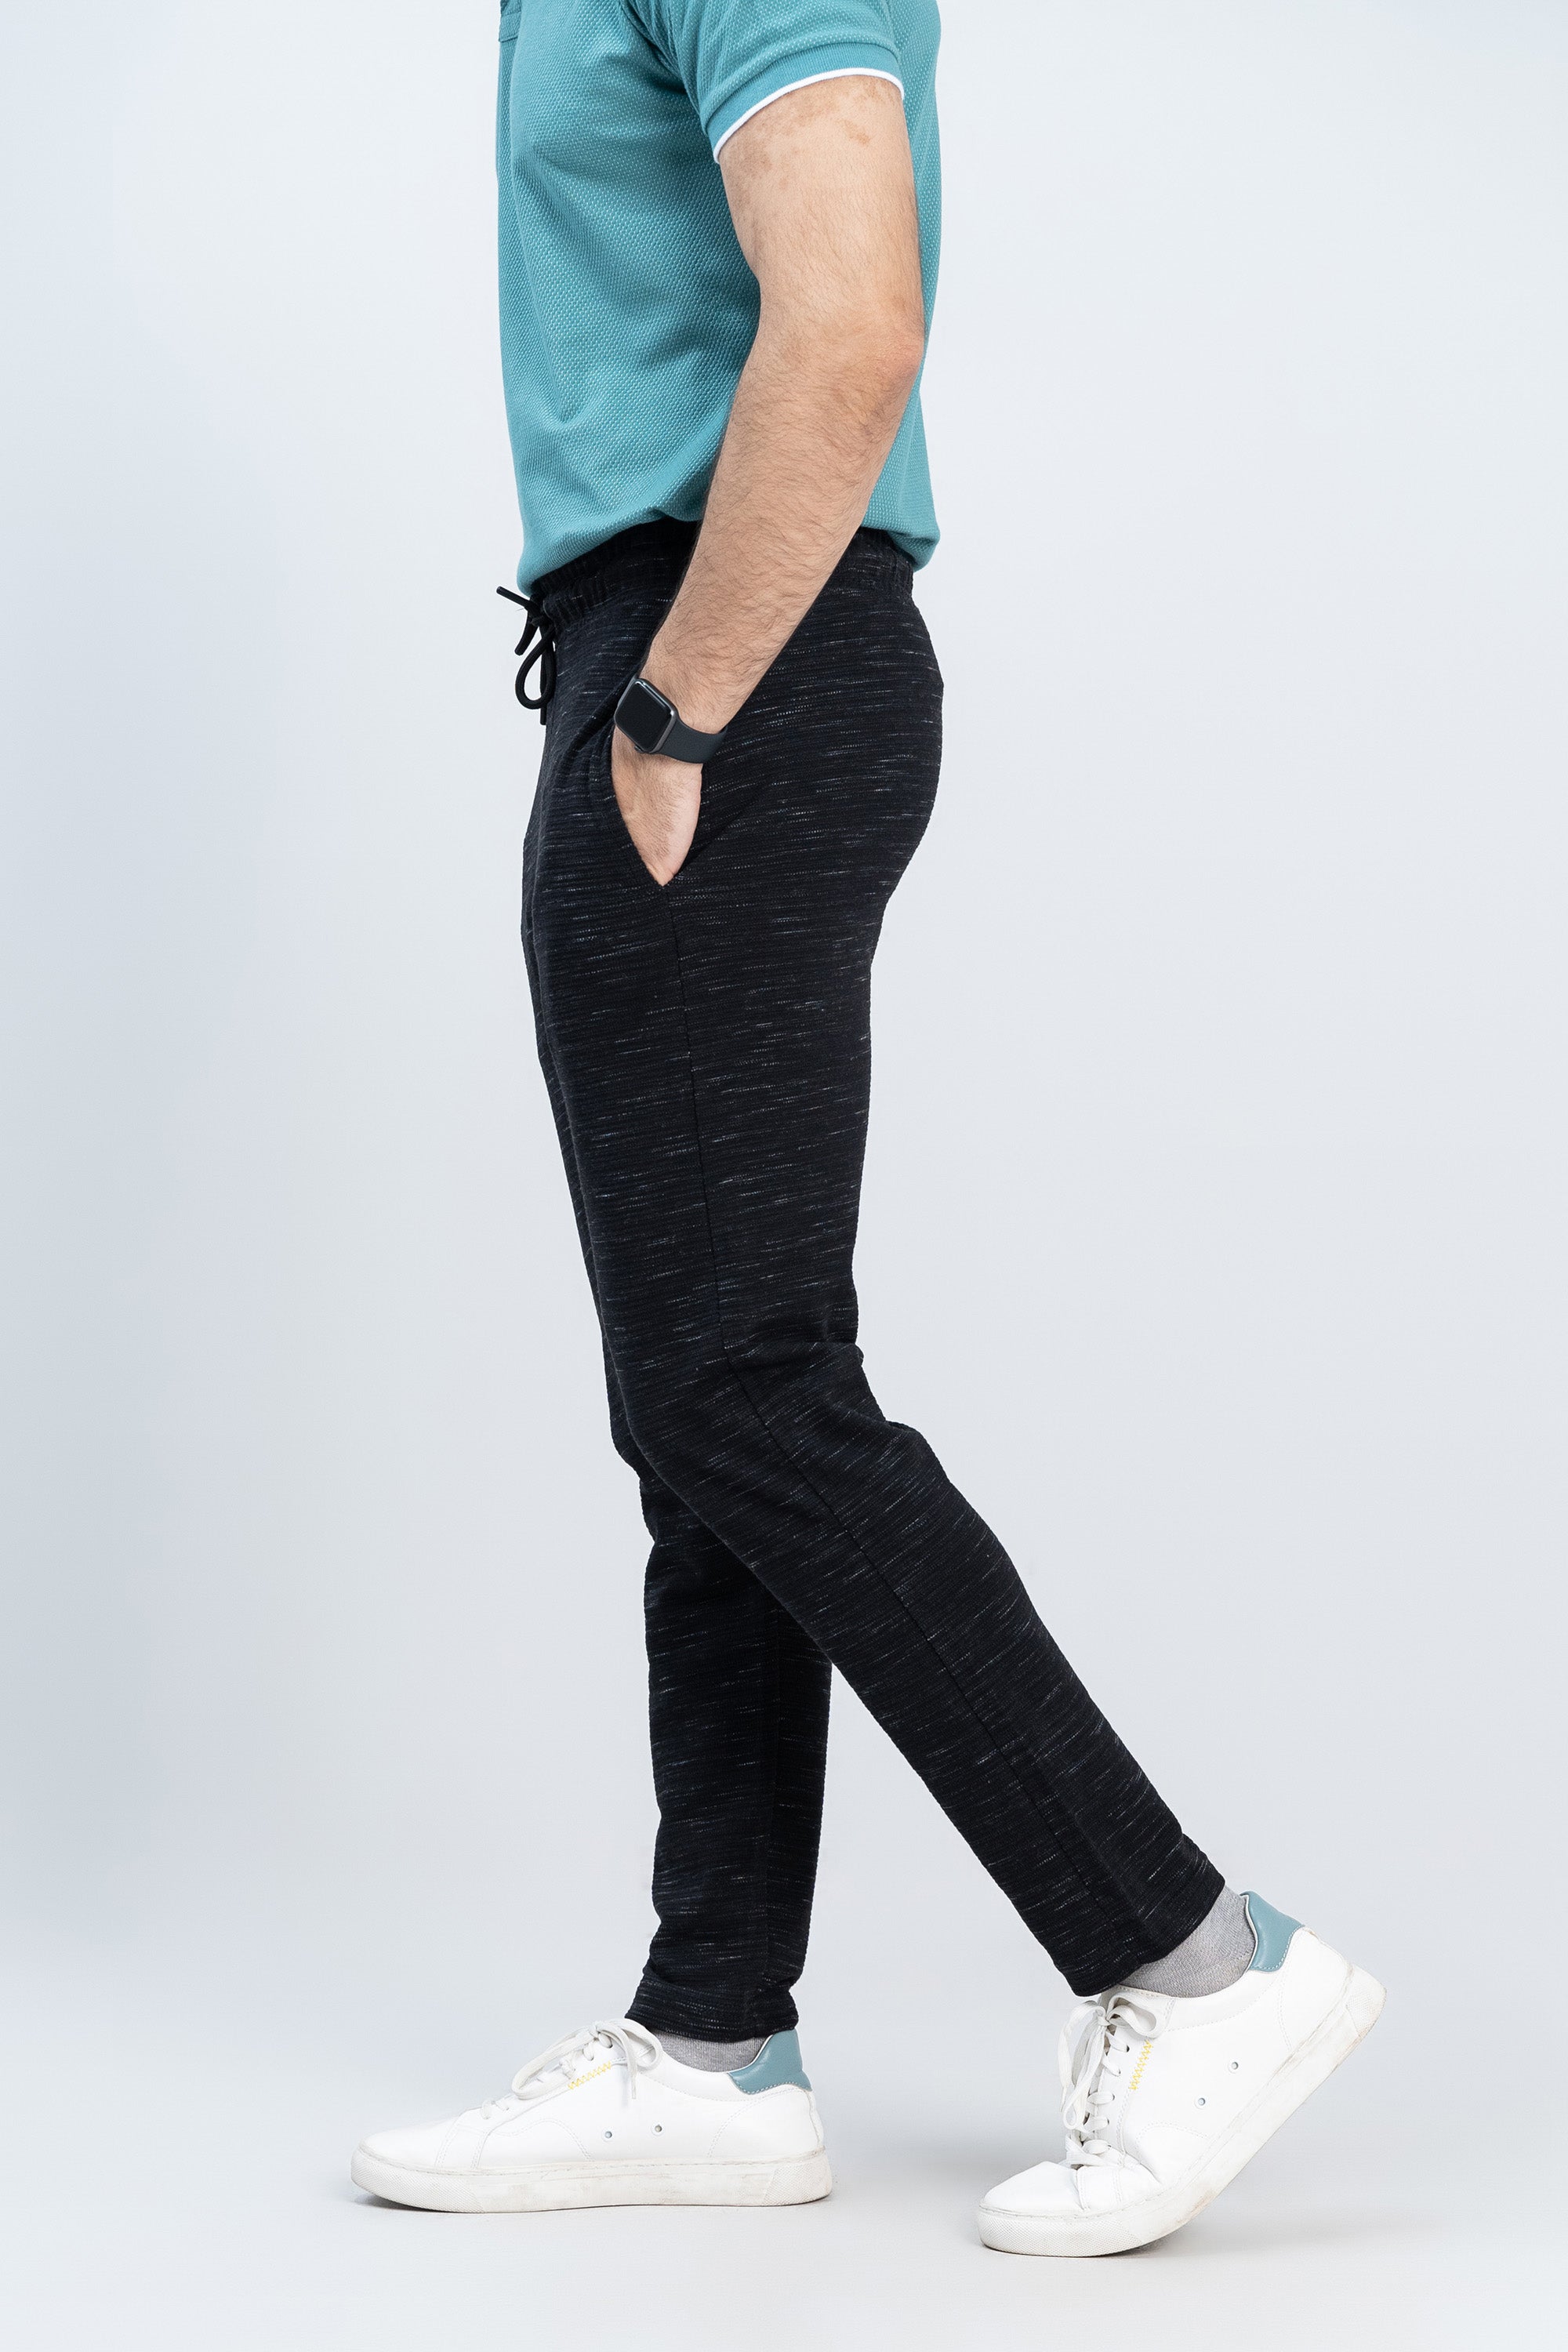 Comfy Black Knitted Trousers